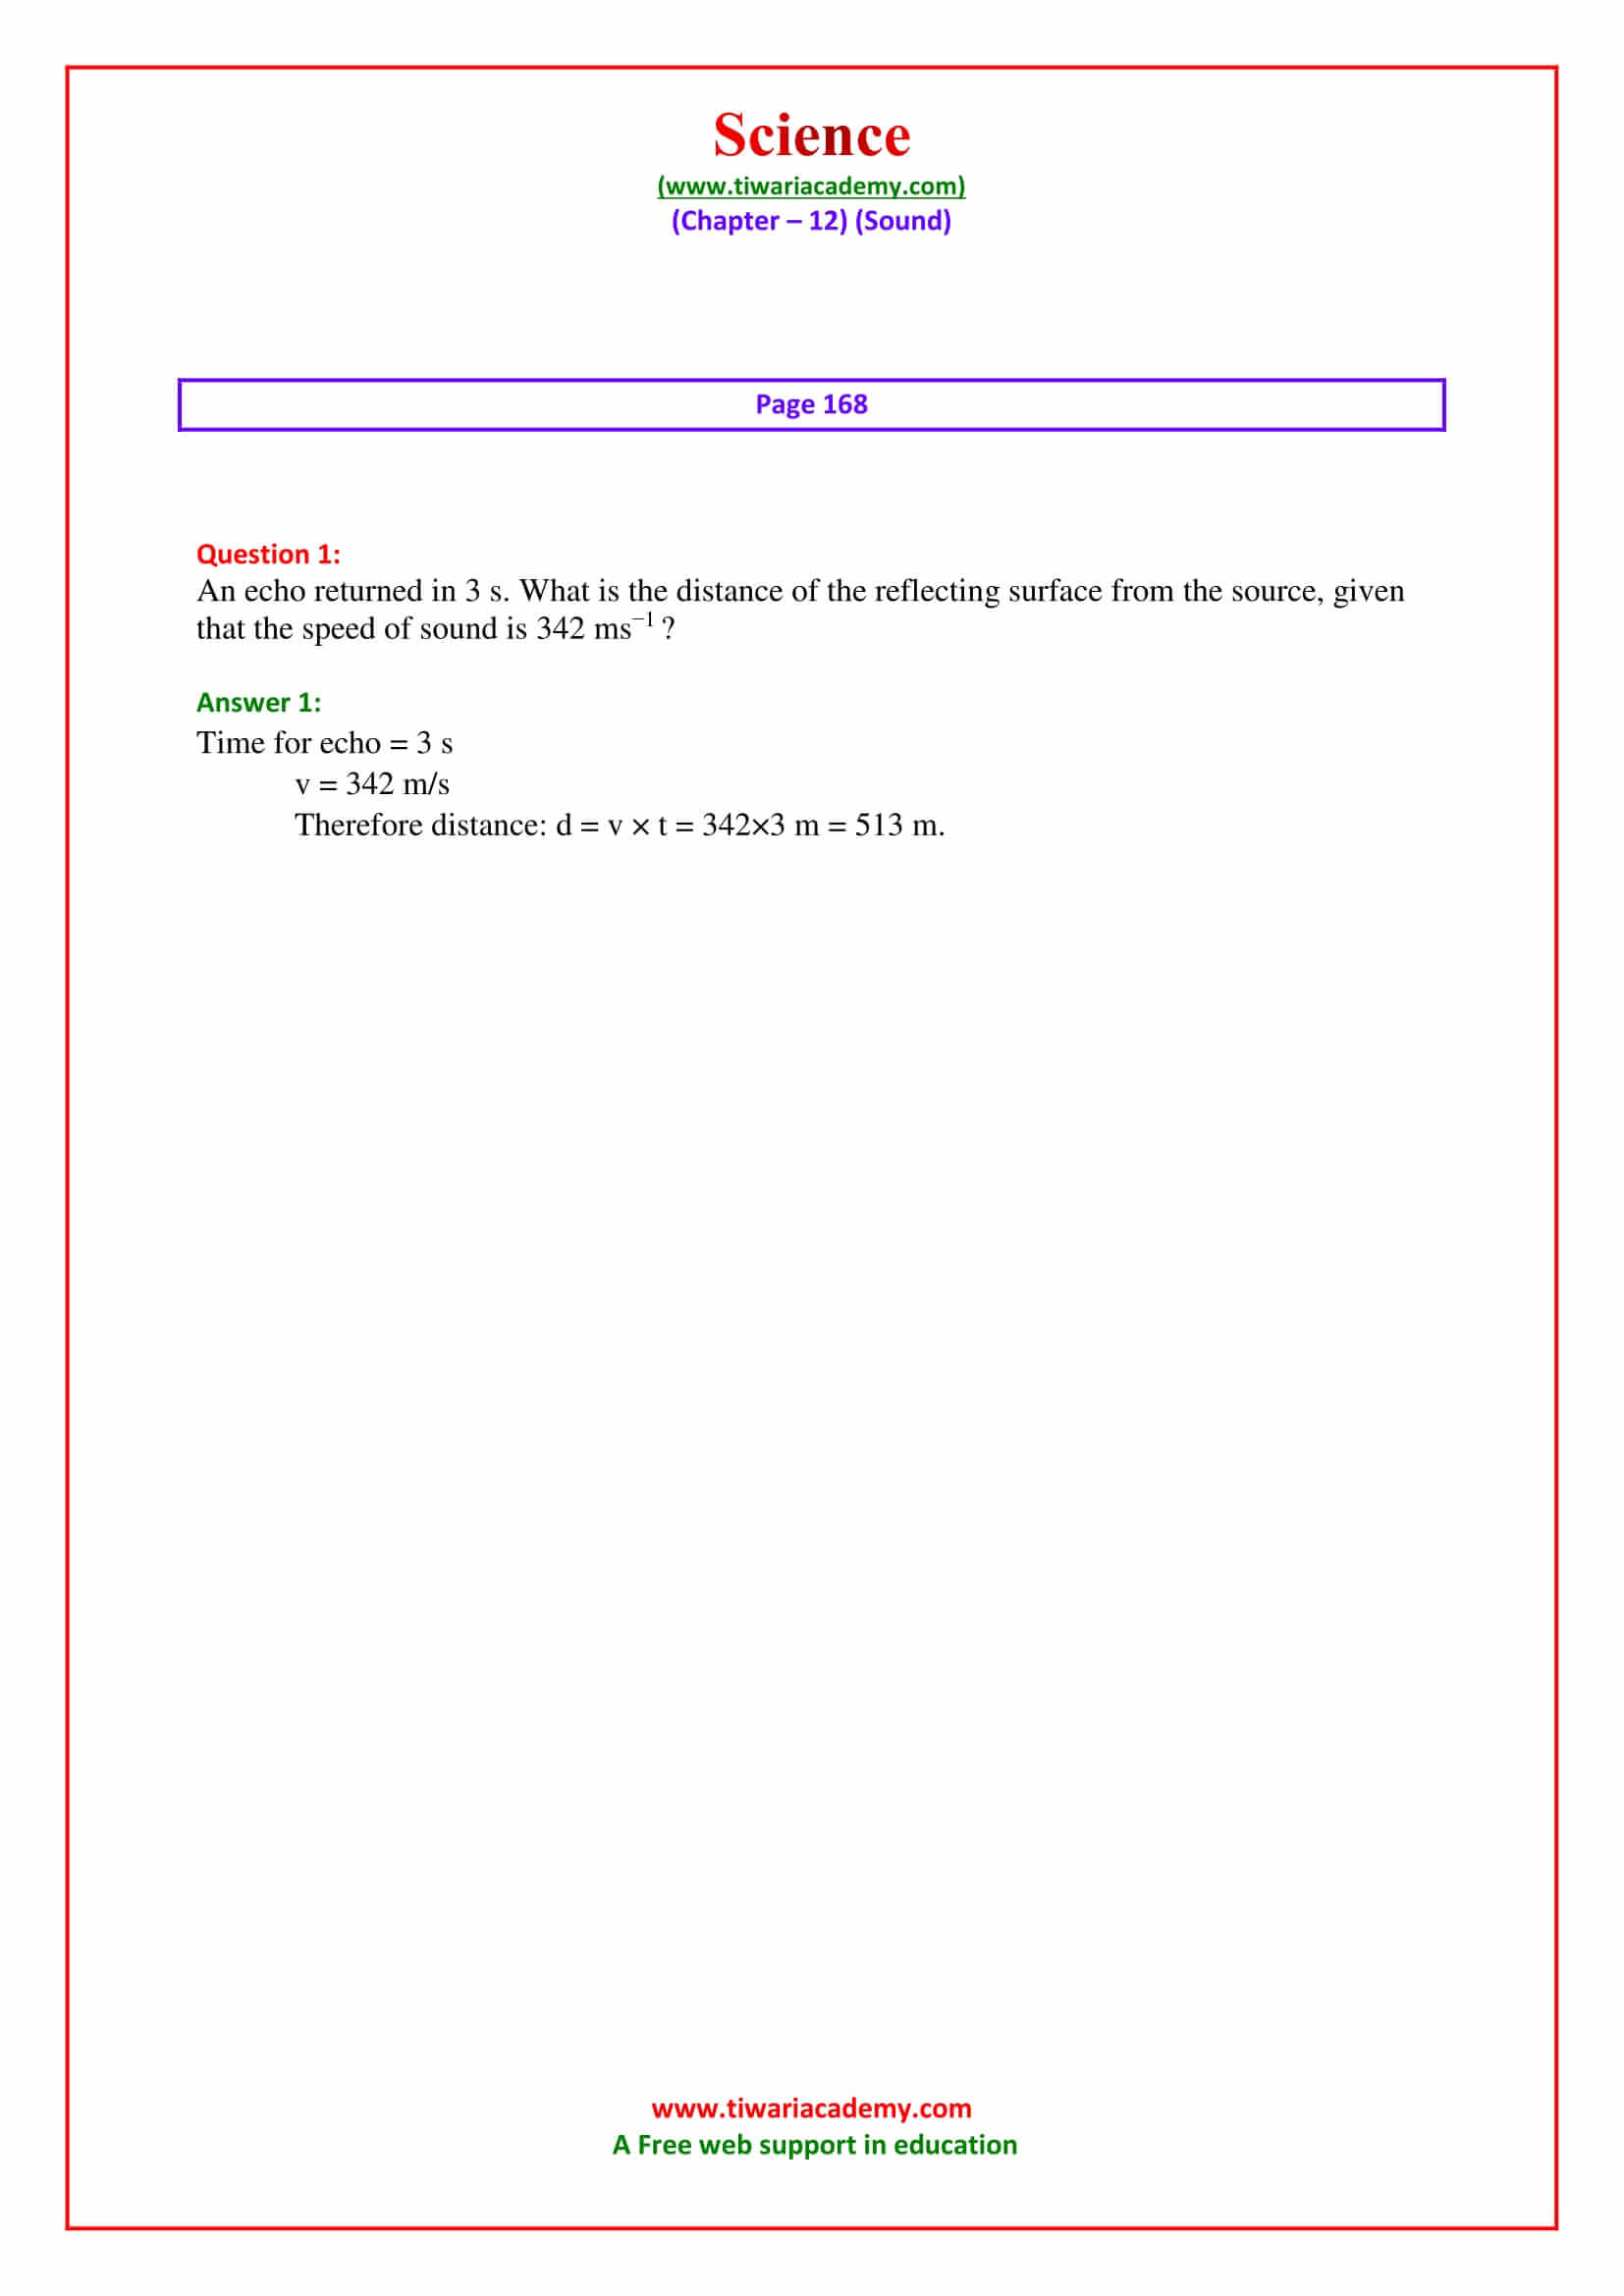 NCERT Solutions for Class 9 Science Chapter 12 Sound page 168